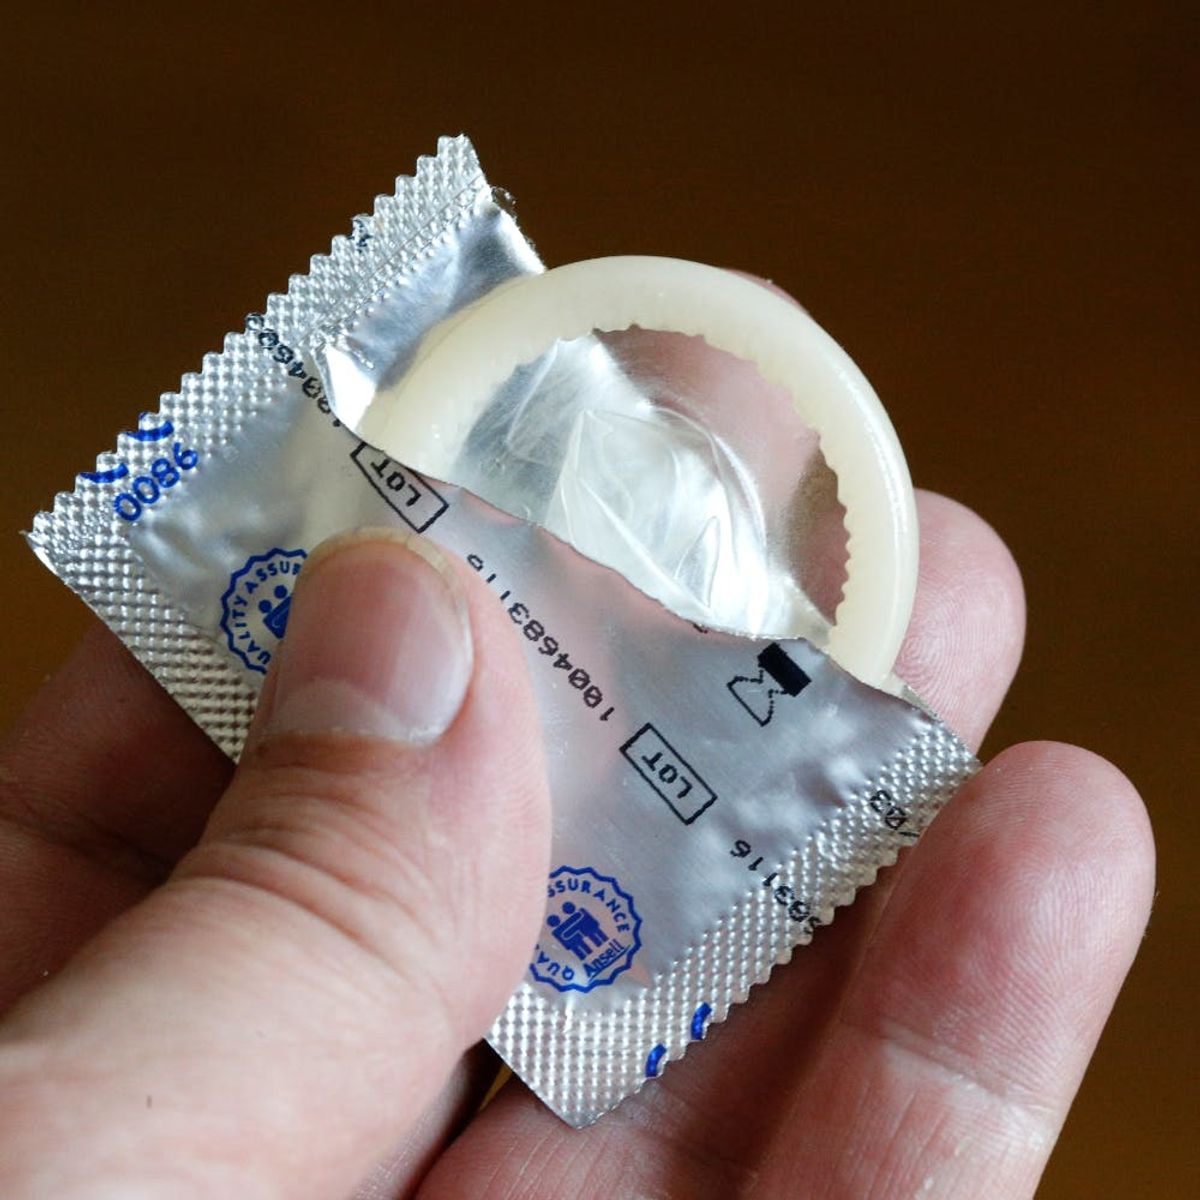 Why These New Condoms Are Sparking an Important Conversation About Consent